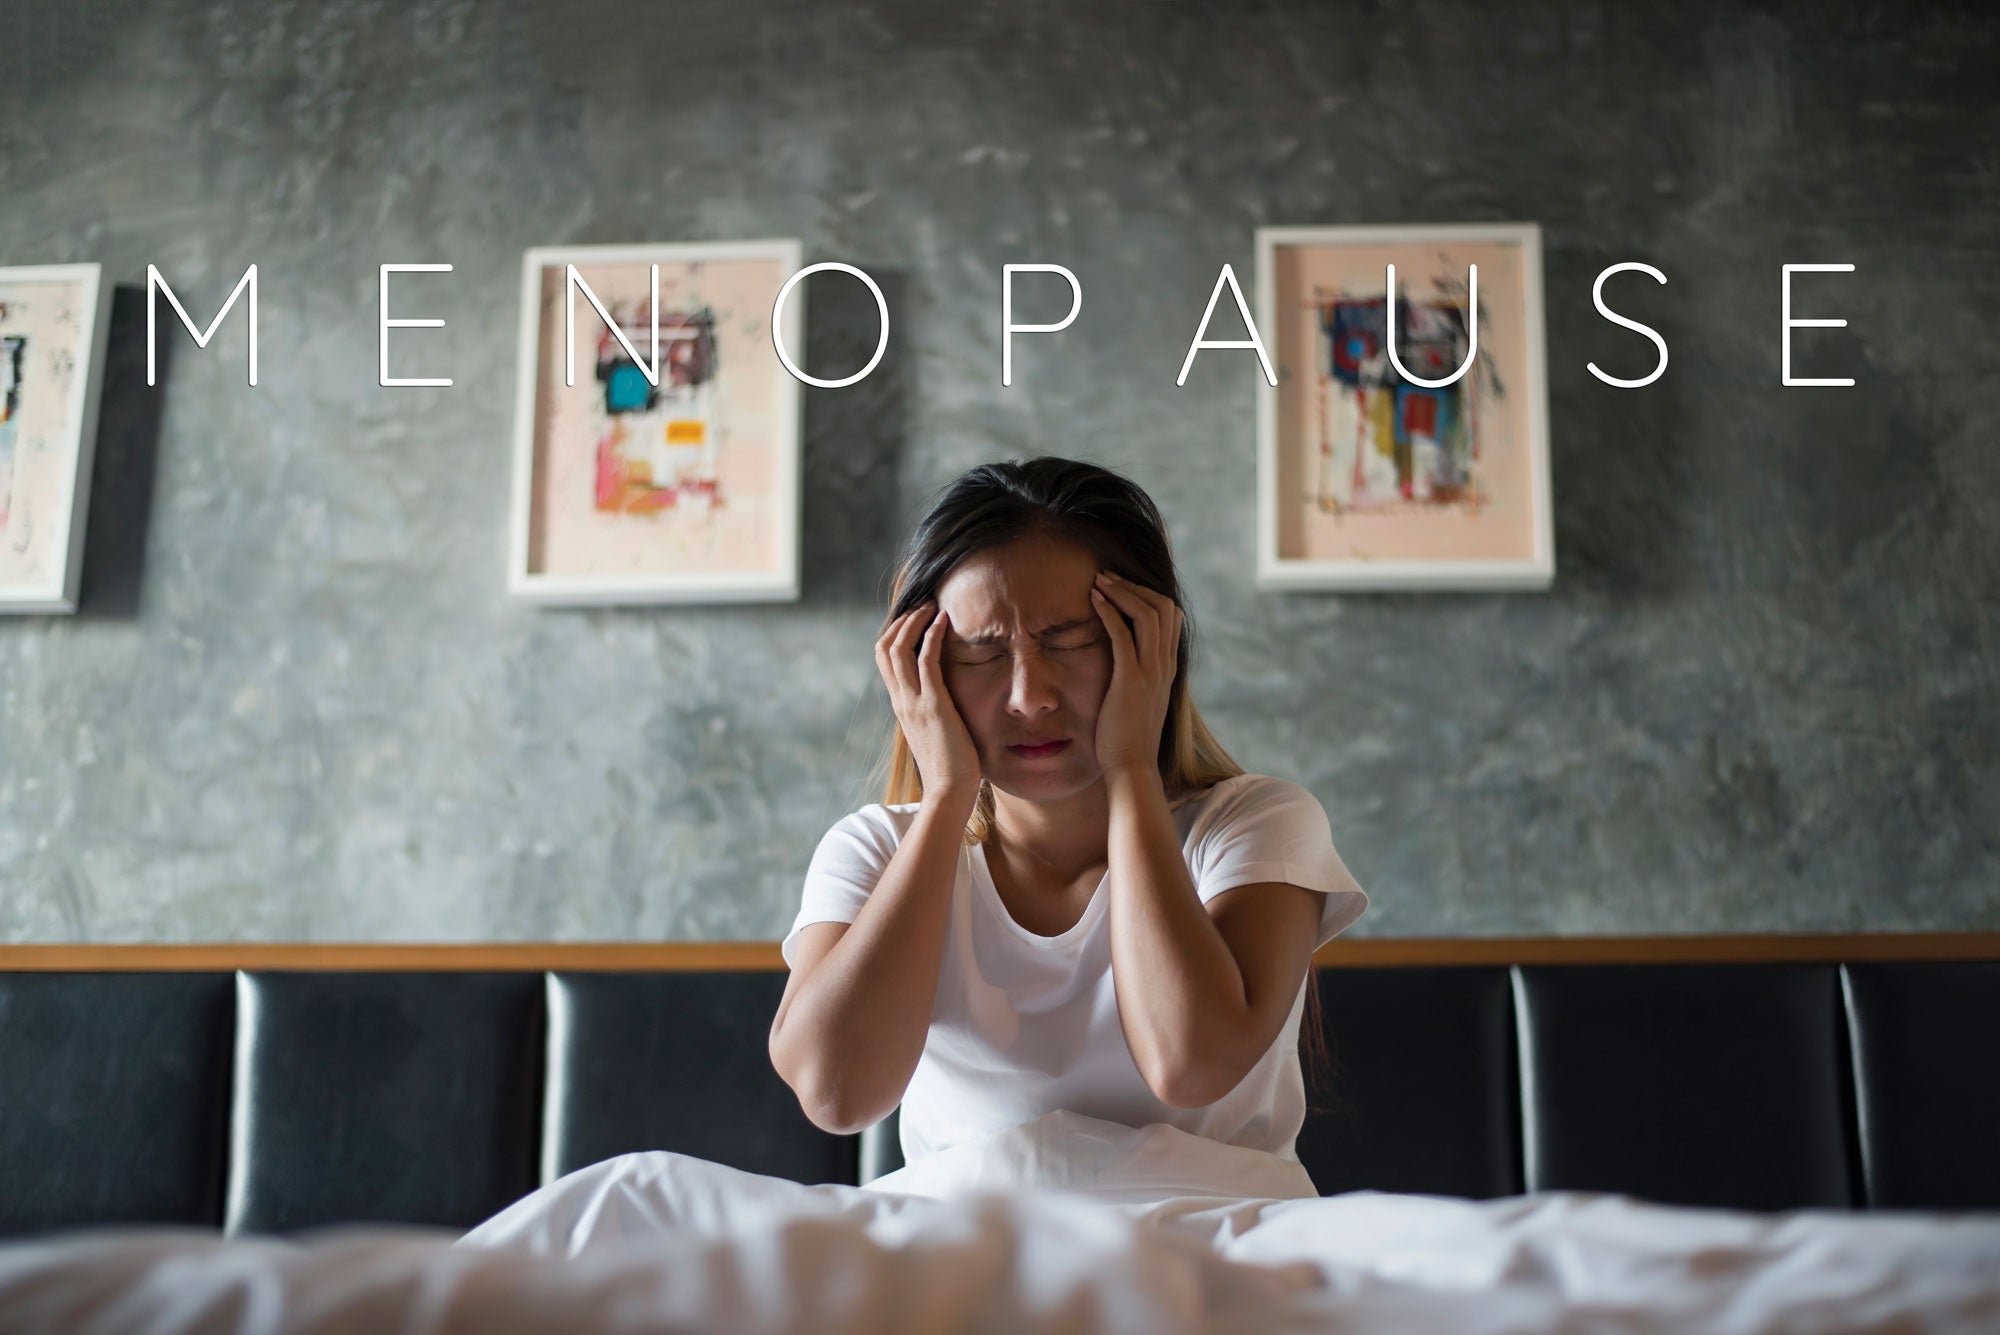 Image of a woman sitting on her bed in agony. Behind her is a grey wall with 2 art frames, and in the middle of the image is a text that says, "Menopause".